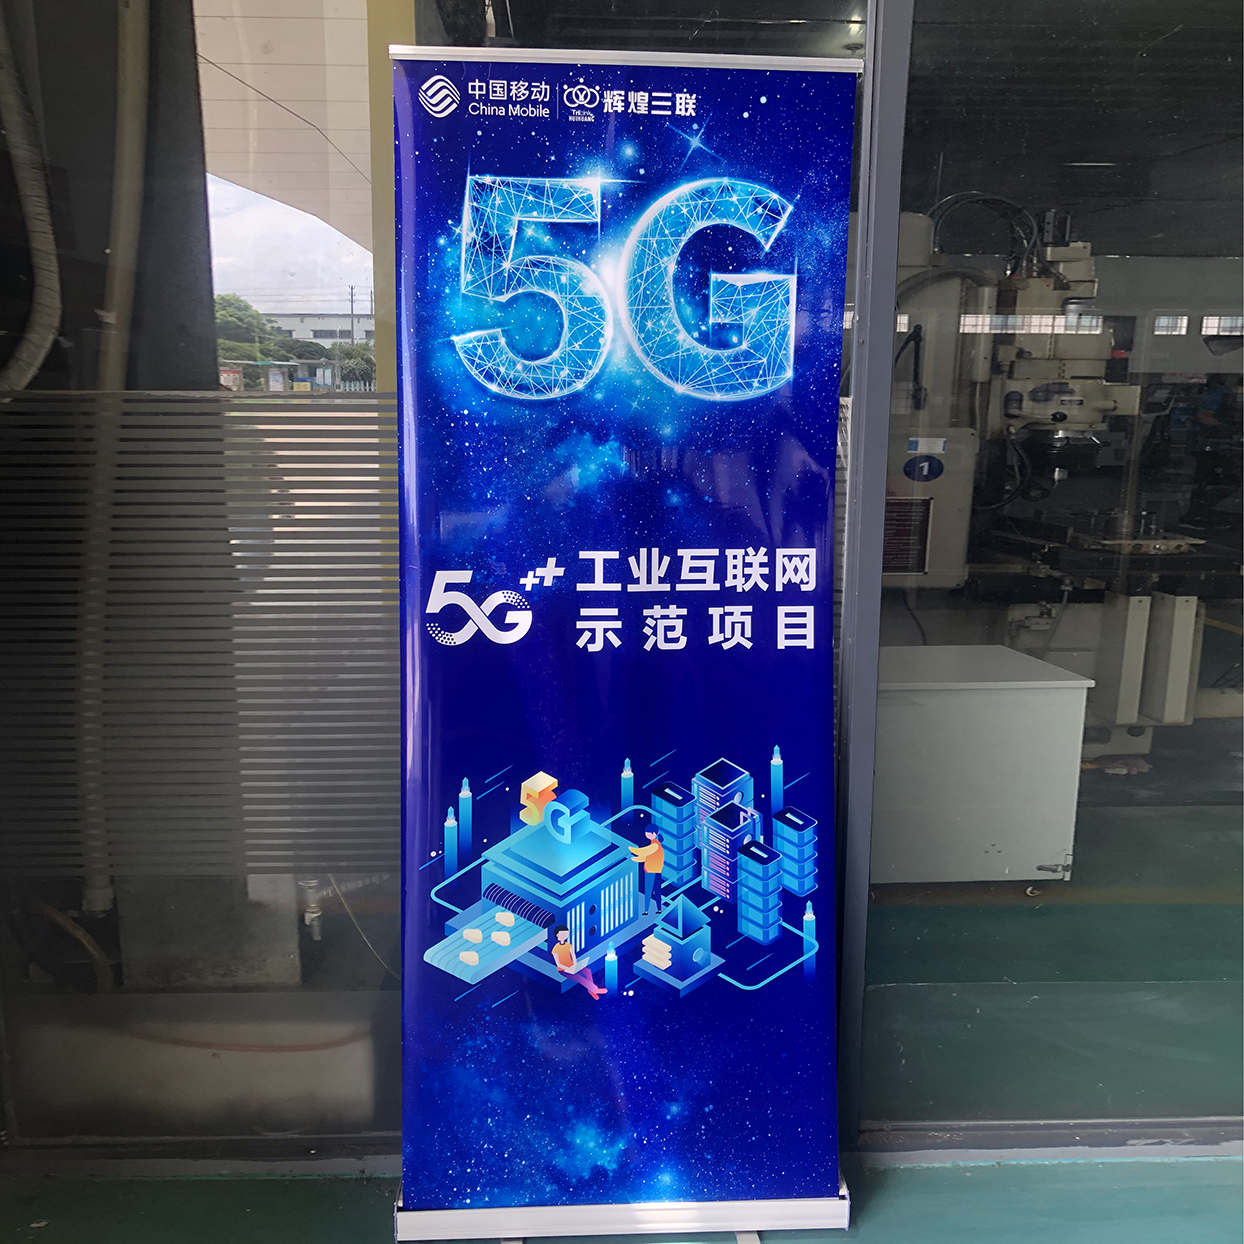  TriLink Huihuang became a demonstration project site of "5G + Industrial Internet"